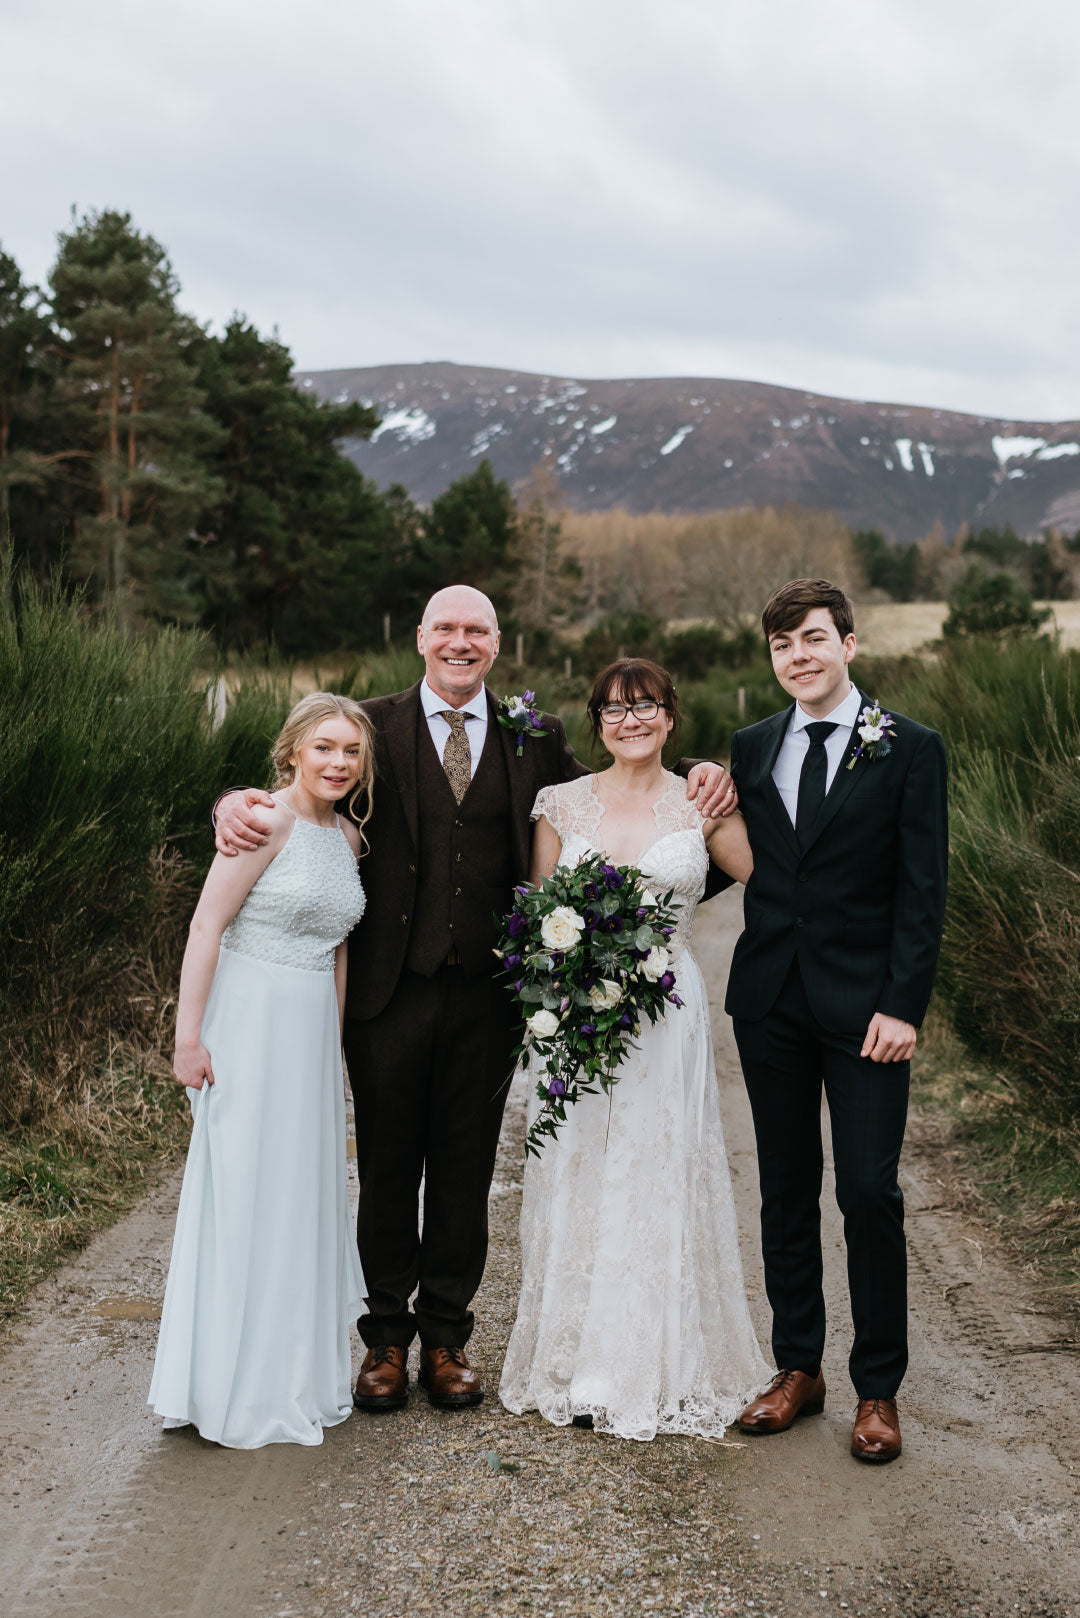 Bride with Groom and Family